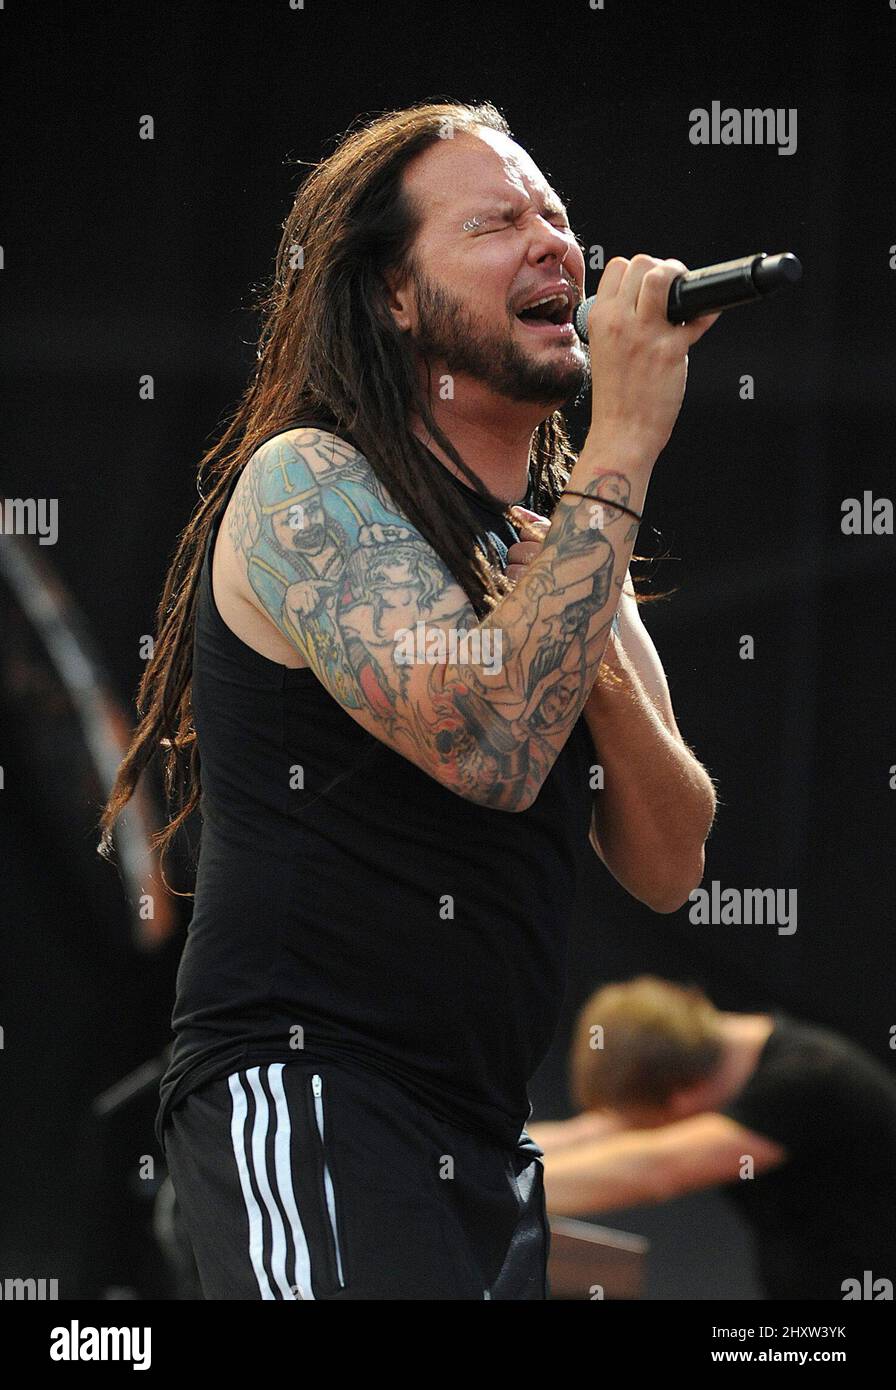 Singer Jonathan Davis of the band Korn performs at Rock on the Range Music Festival that took place at the Crew Stadium. Stock Photo